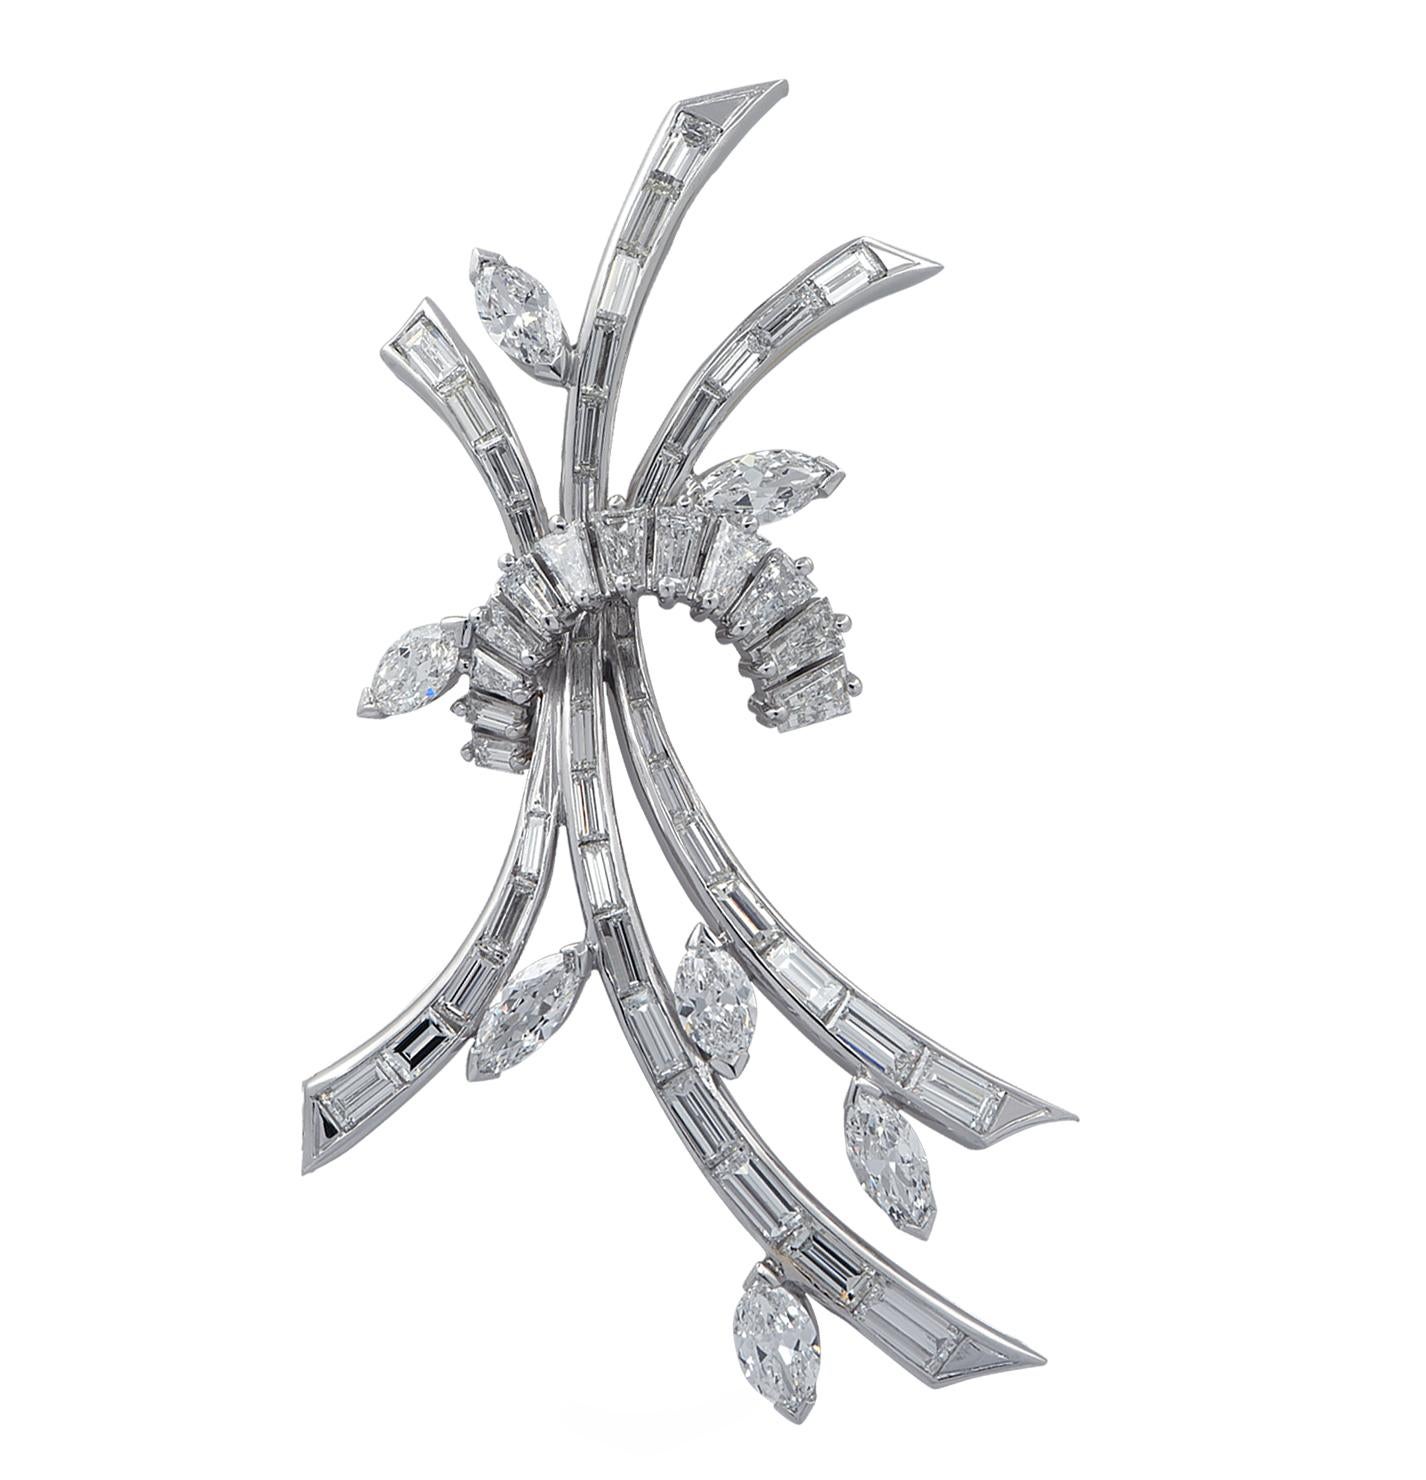 Diamond Brooch pin crafted in platinum featuring approximately 6.50 carats of mixed cut diamonds, G color, VS clarity. 48 baguette cut diamonds and 7 marquise cut diamonds are arranged into three diamond encrusted branches, tied together, capturing